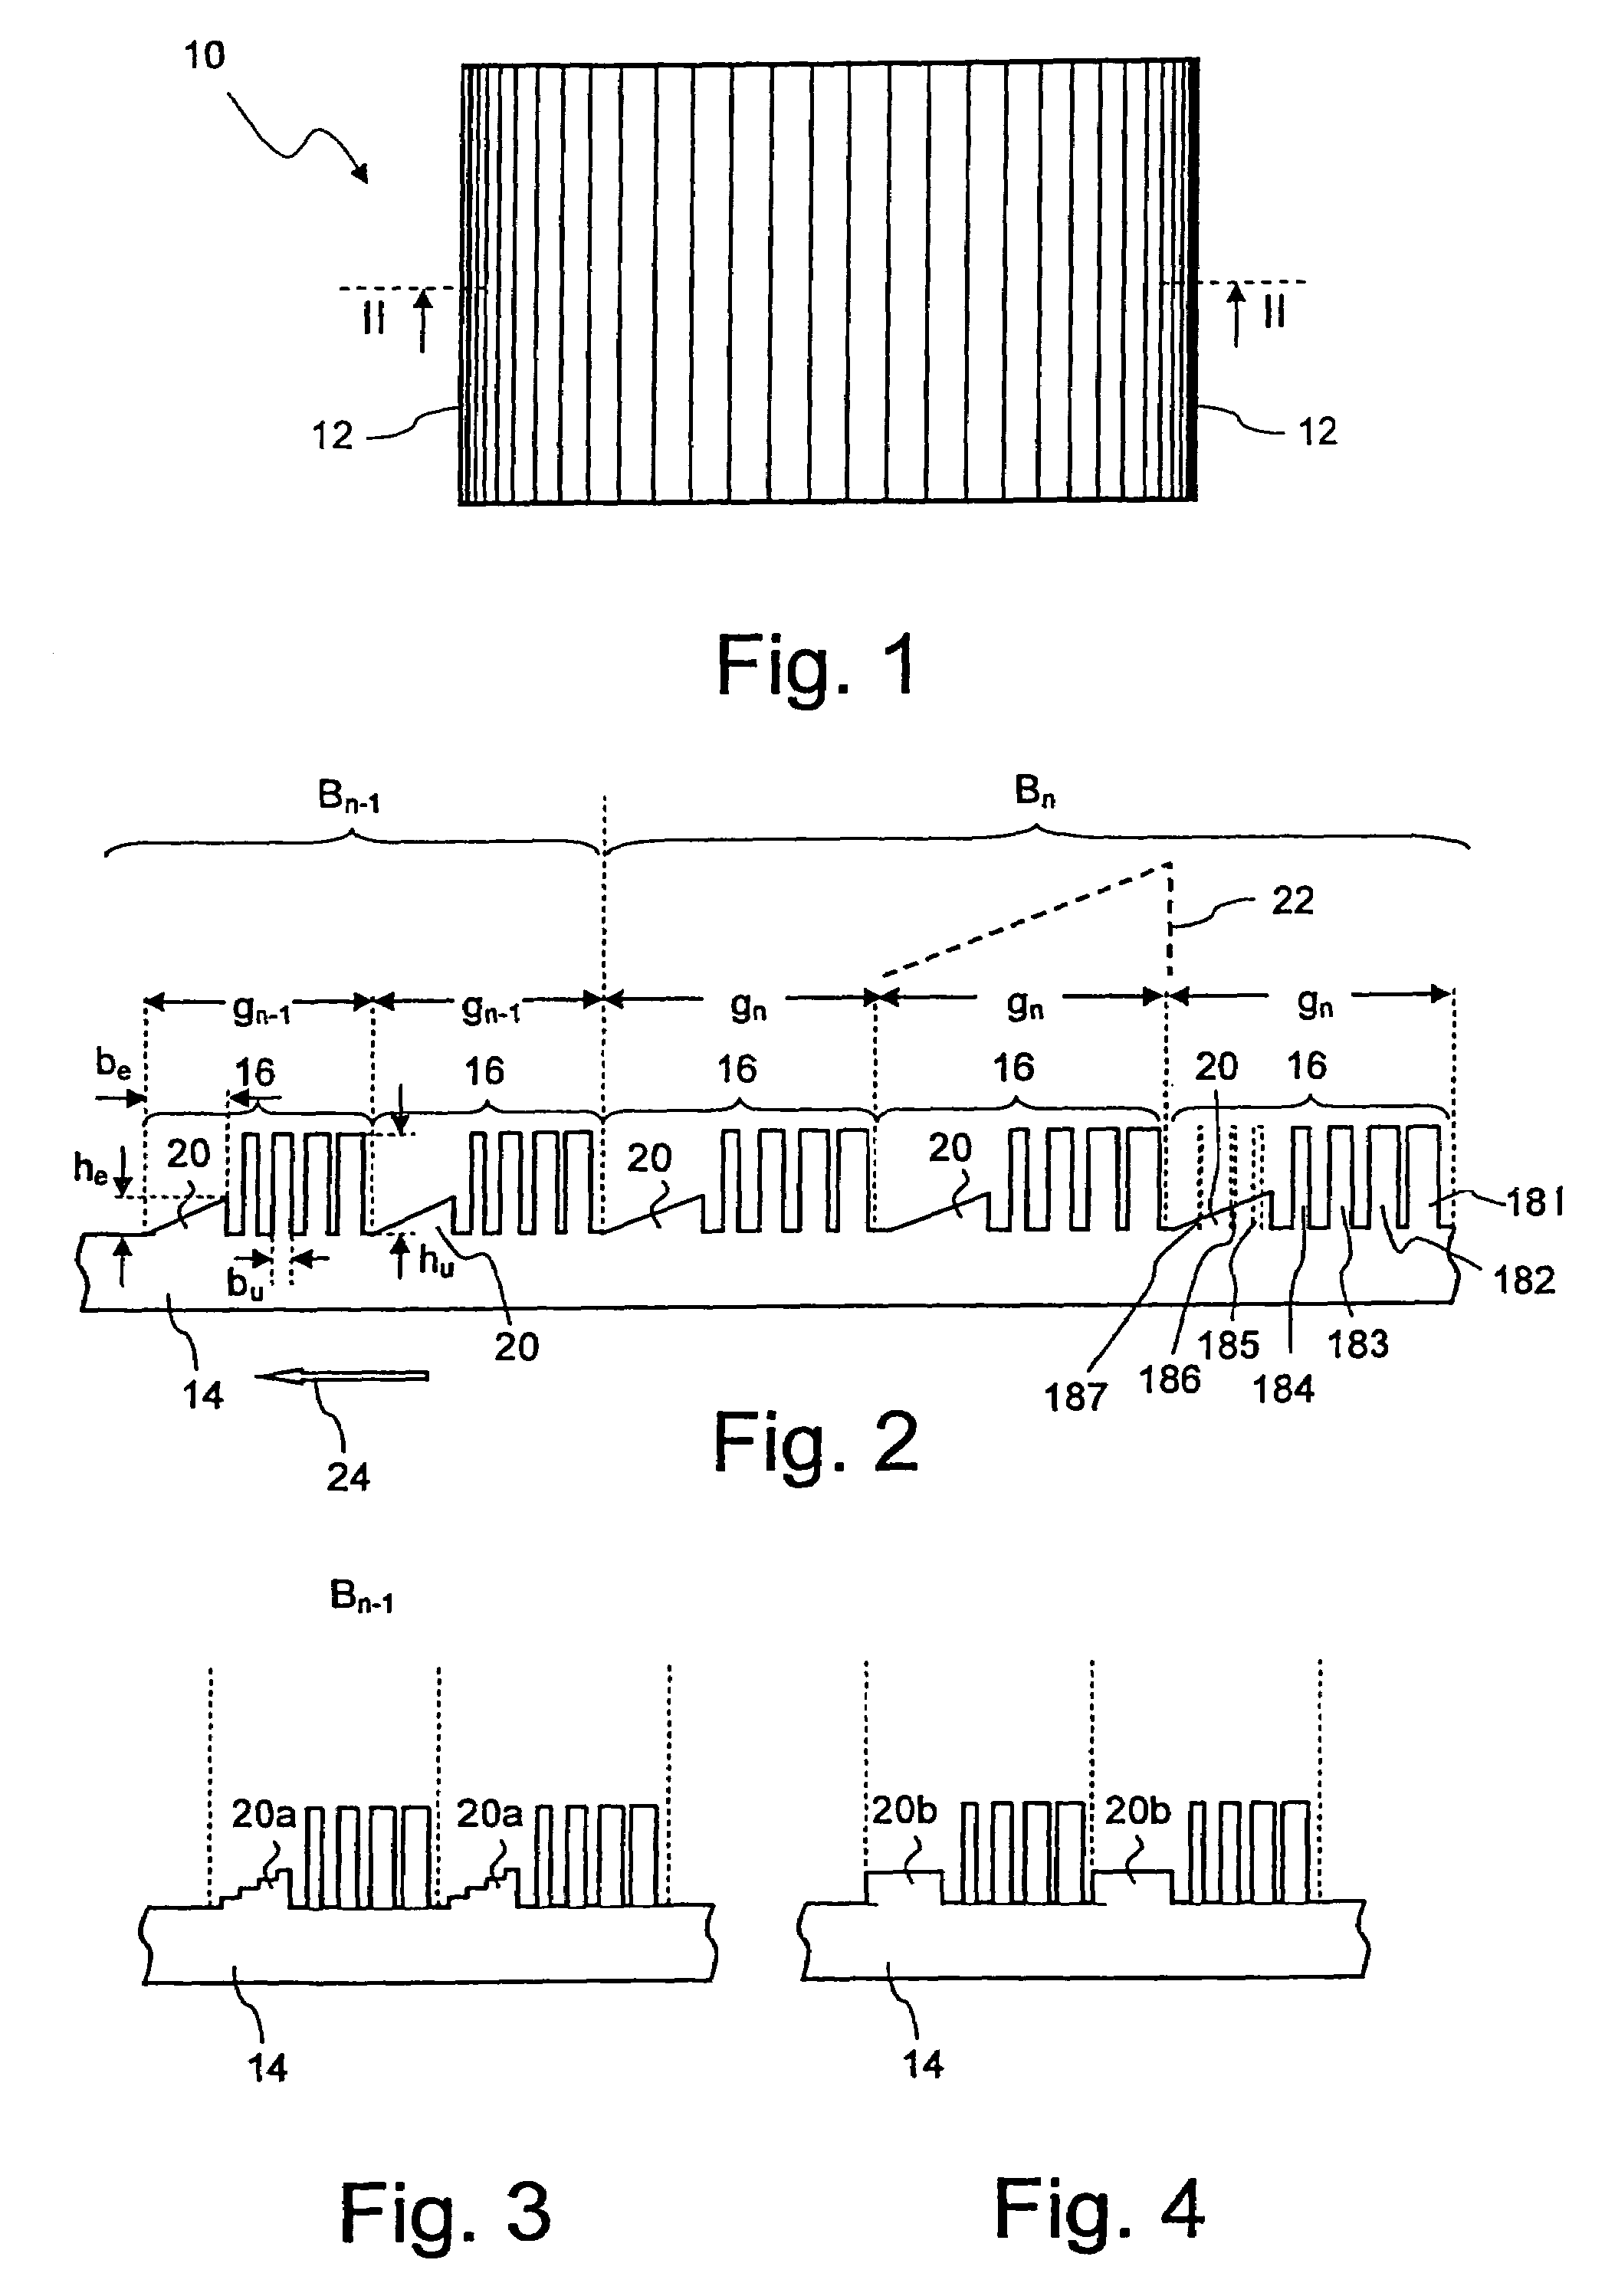 Blazed diffractive optical element and projection objective for a microlithographic projection exposure apparatus